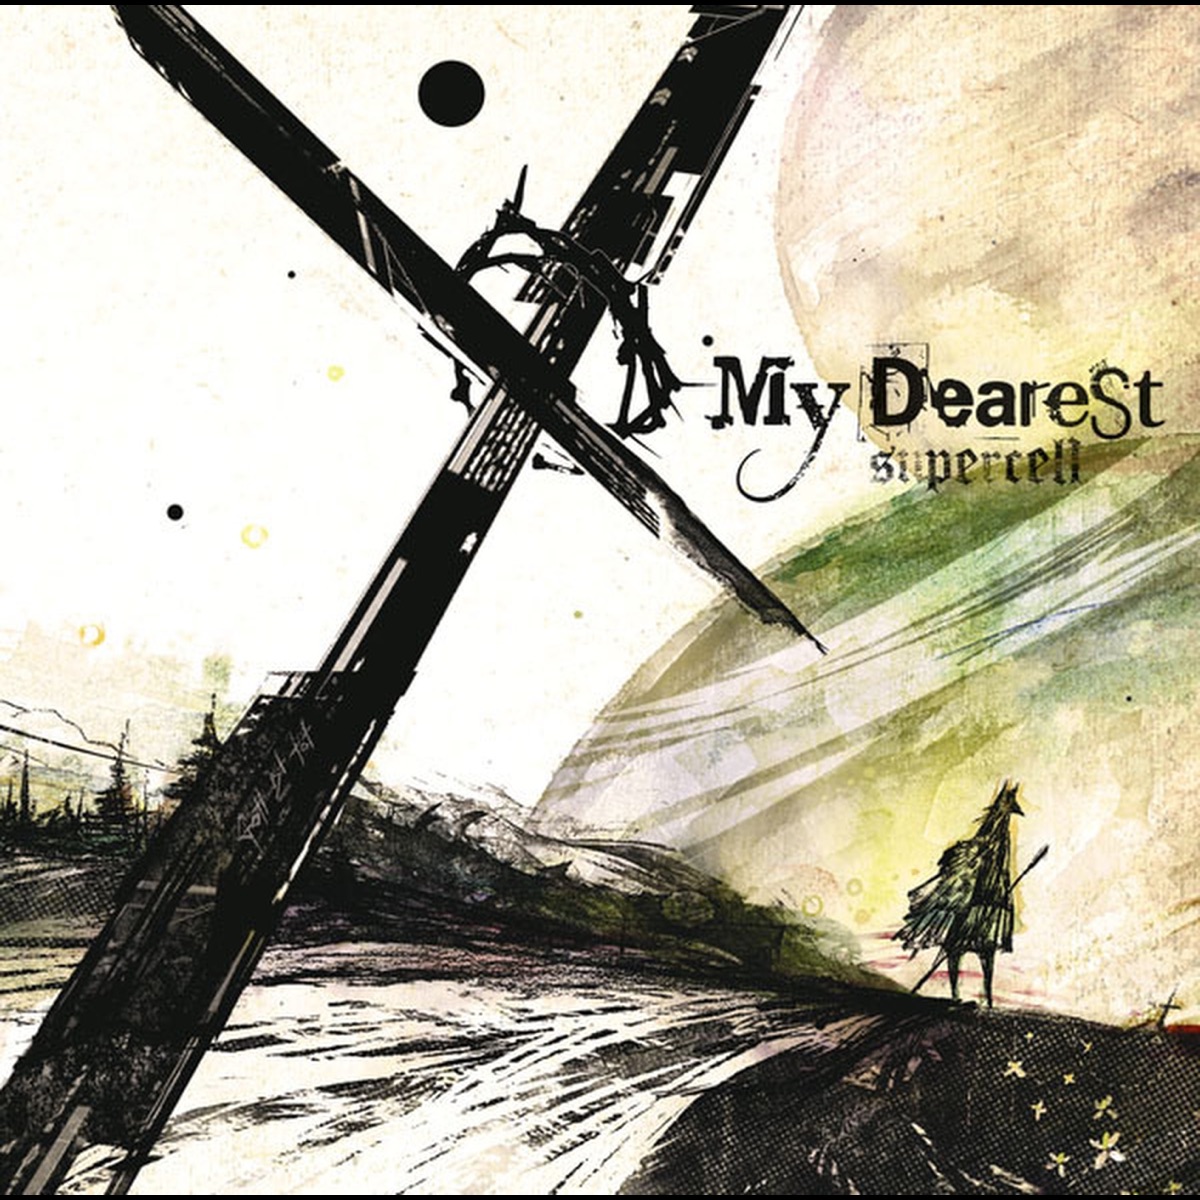 Cover art for『supercell - My Dearest』from the release『My Dearest